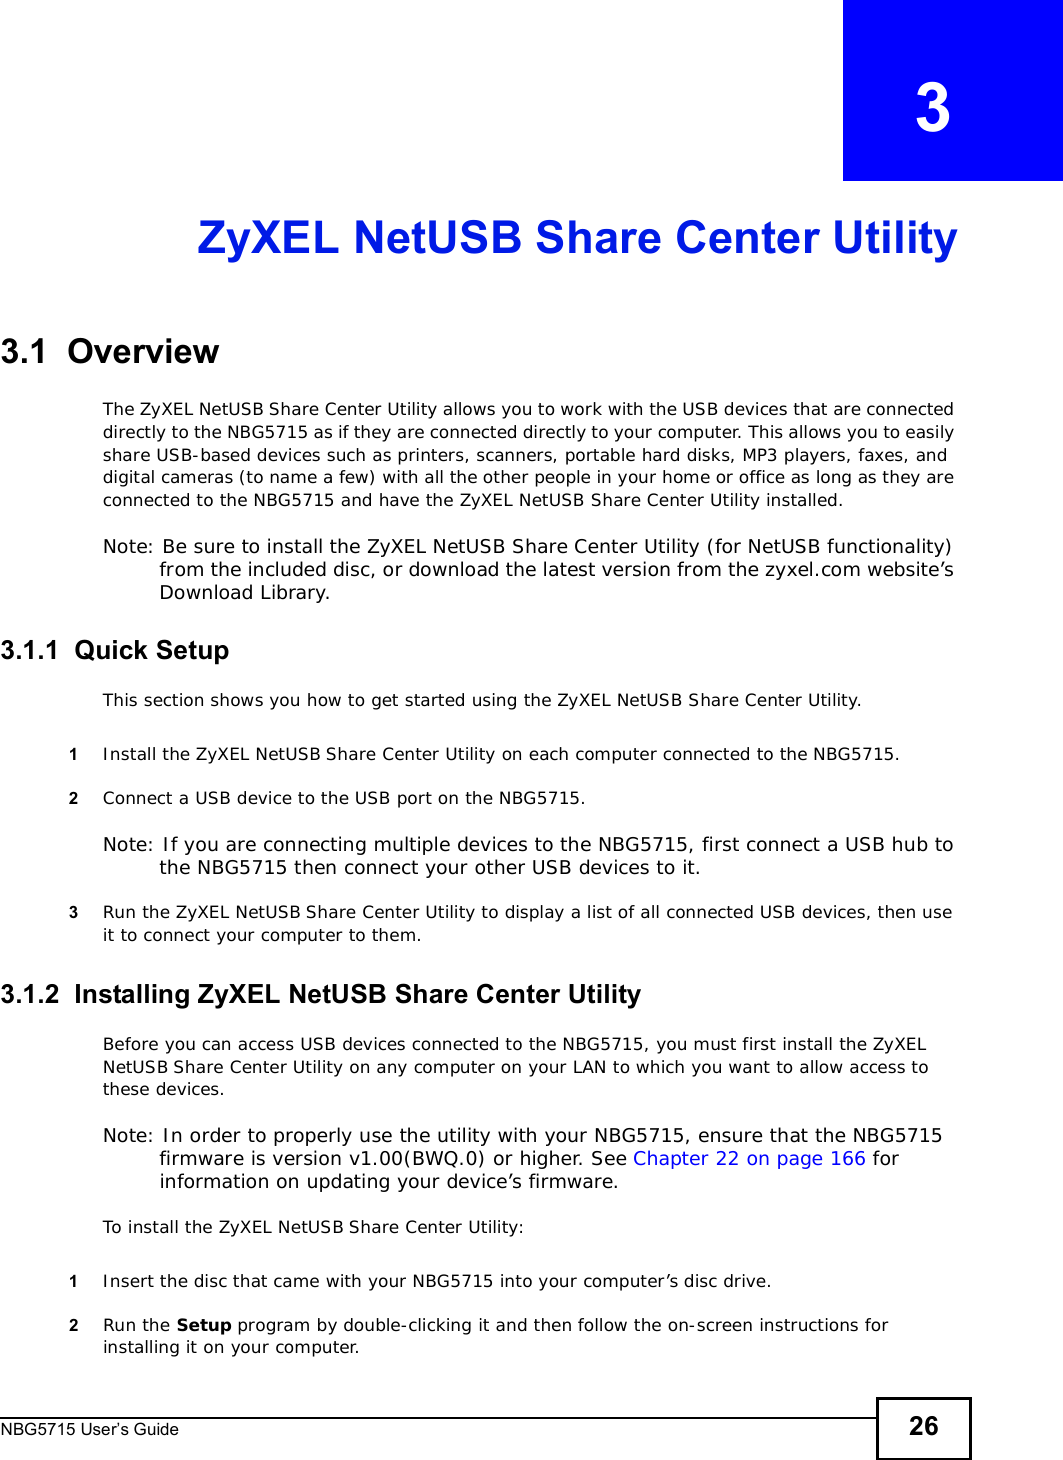 NBG5715 User’s Guide 26CHAPTER   3ZyXEL NetUSB Share Center Utility3.1  OverviewThe ZyXEL NetUSBShare Center Utility allows you to work with the USB devices that are connected directly to the NBG5715 as if they are connected directly to your computer. This allows you to easily share USB-based devices such as printers, scanners, portable hard disks, MP3 players, faxes, and digital cameras (to name a few) with all the other people in your home or office as long as they are connected to the NBG5715 and have the ZyXEL NetUSB Share Center Utility installed.Note: Be sure to install the ZyXEL NetUSB Share Center Utility (for NetUSB functionality) from the included disc, or download the latest version from the zyxel.com website’s Download Library.3.1.1  Quick SetupThis section shows you how to get started using the ZyXEL NetUSB Share Center Utility.1Install the ZyXEL NetUSBShare Center Utility on each computer connected to the NBG5715.2Connect a USB device to the USB port on the NBG5715. Note: If you are connecting multiple devices to the NBG5715, first connect a USB hub to the NBG5715 then connect your other USB devices to it.3Run the ZyXEL NetUSBShare Center Utility to display a list of all connected USB devices, then use it to connect your computer to them.3.1.2  Installing ZyXEL NetUSB Share Center UtilityBefore you can access USB devices connected to the NBG5715, you must first install the ZyXEL NetUSBShare Center Utility on any computer on your LAN to which you want to allow access to these devices.Note: In order to properly use the utility with your NBG5715, ensure that the NBG5715 firmware is version v1.00(BWQ.0) or higher. See Chapter 22 on page 166 for information on updating your device’s firmware.To install the ZyXEL NetUSBShare Center Utility:1Insert the disc that came with your NBG5715 into your computer’s disc drive.2Run the Setup program by double-clicking it and then follow the on-screen instructions for installing it on your computer.